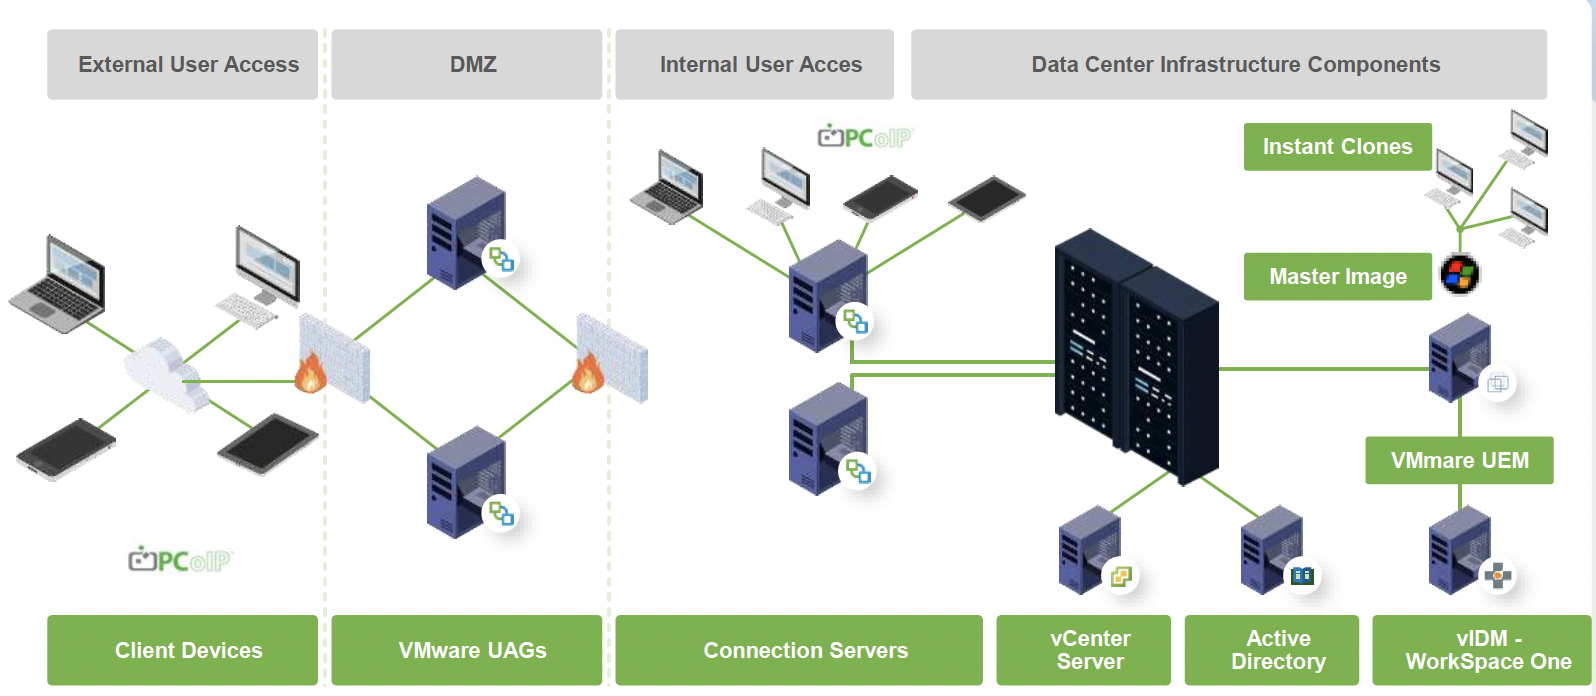 Advantages of VMware Horizon VDI for Securing Corporate Data